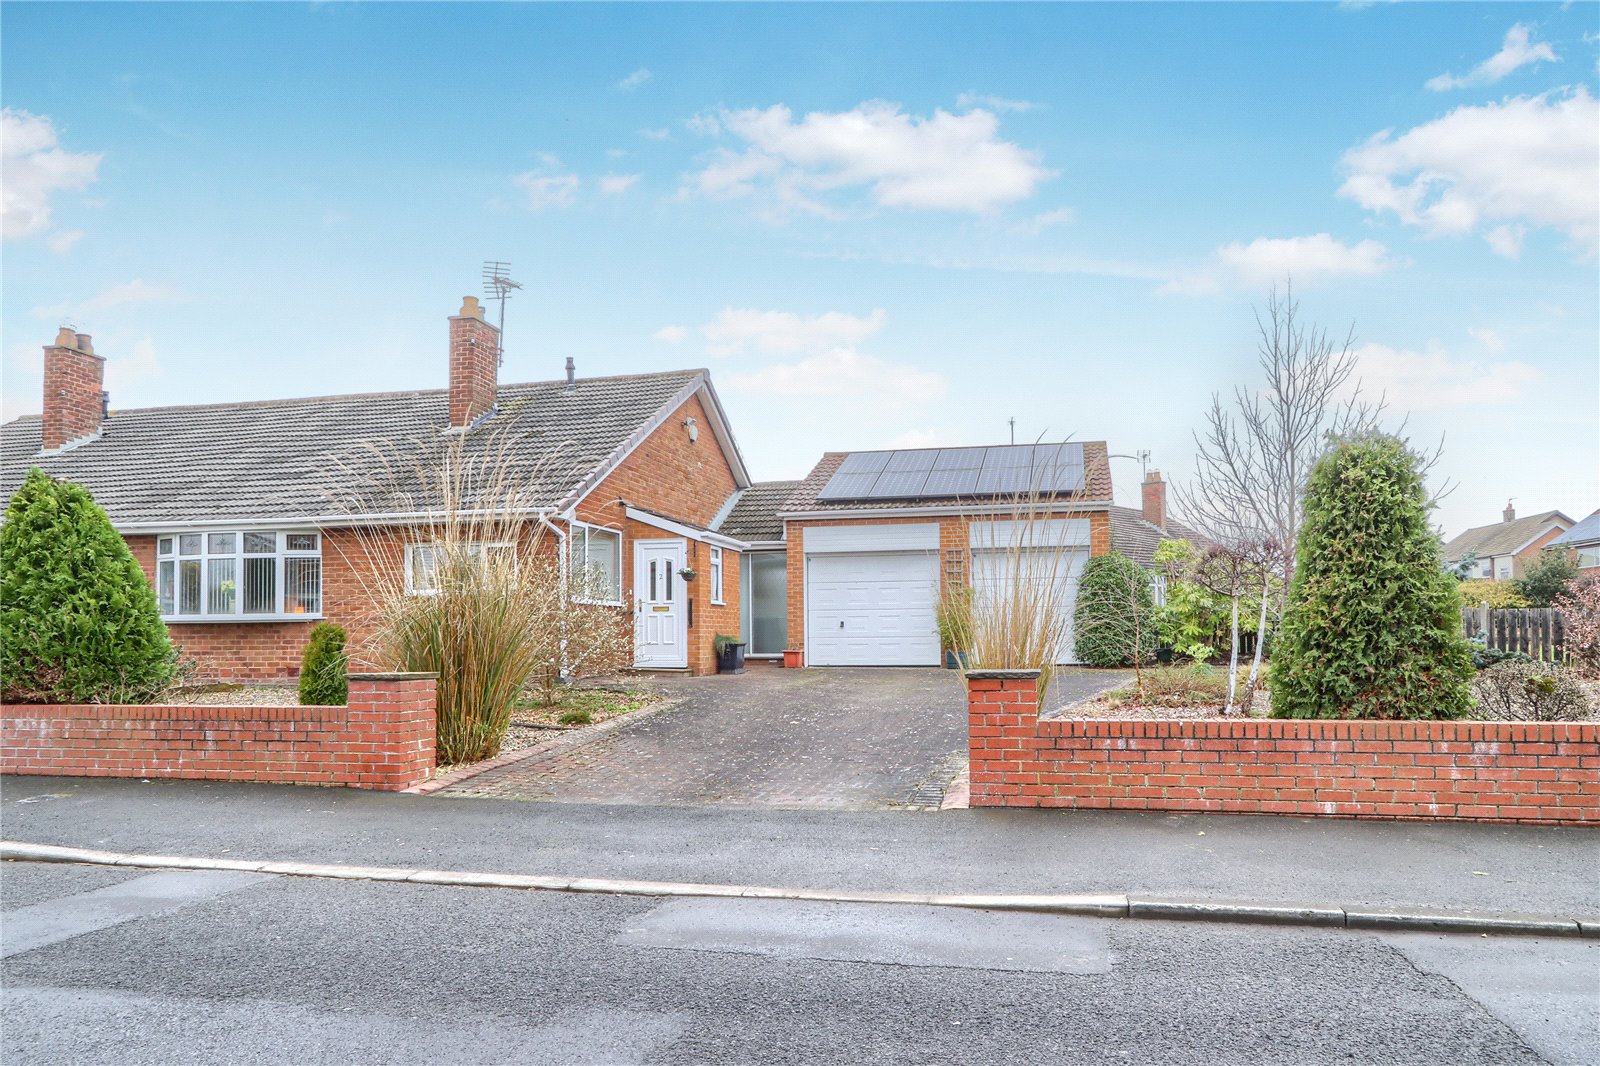 2 bed bungalow for sale in Hackforth Road, Hartburn - Property Image 1